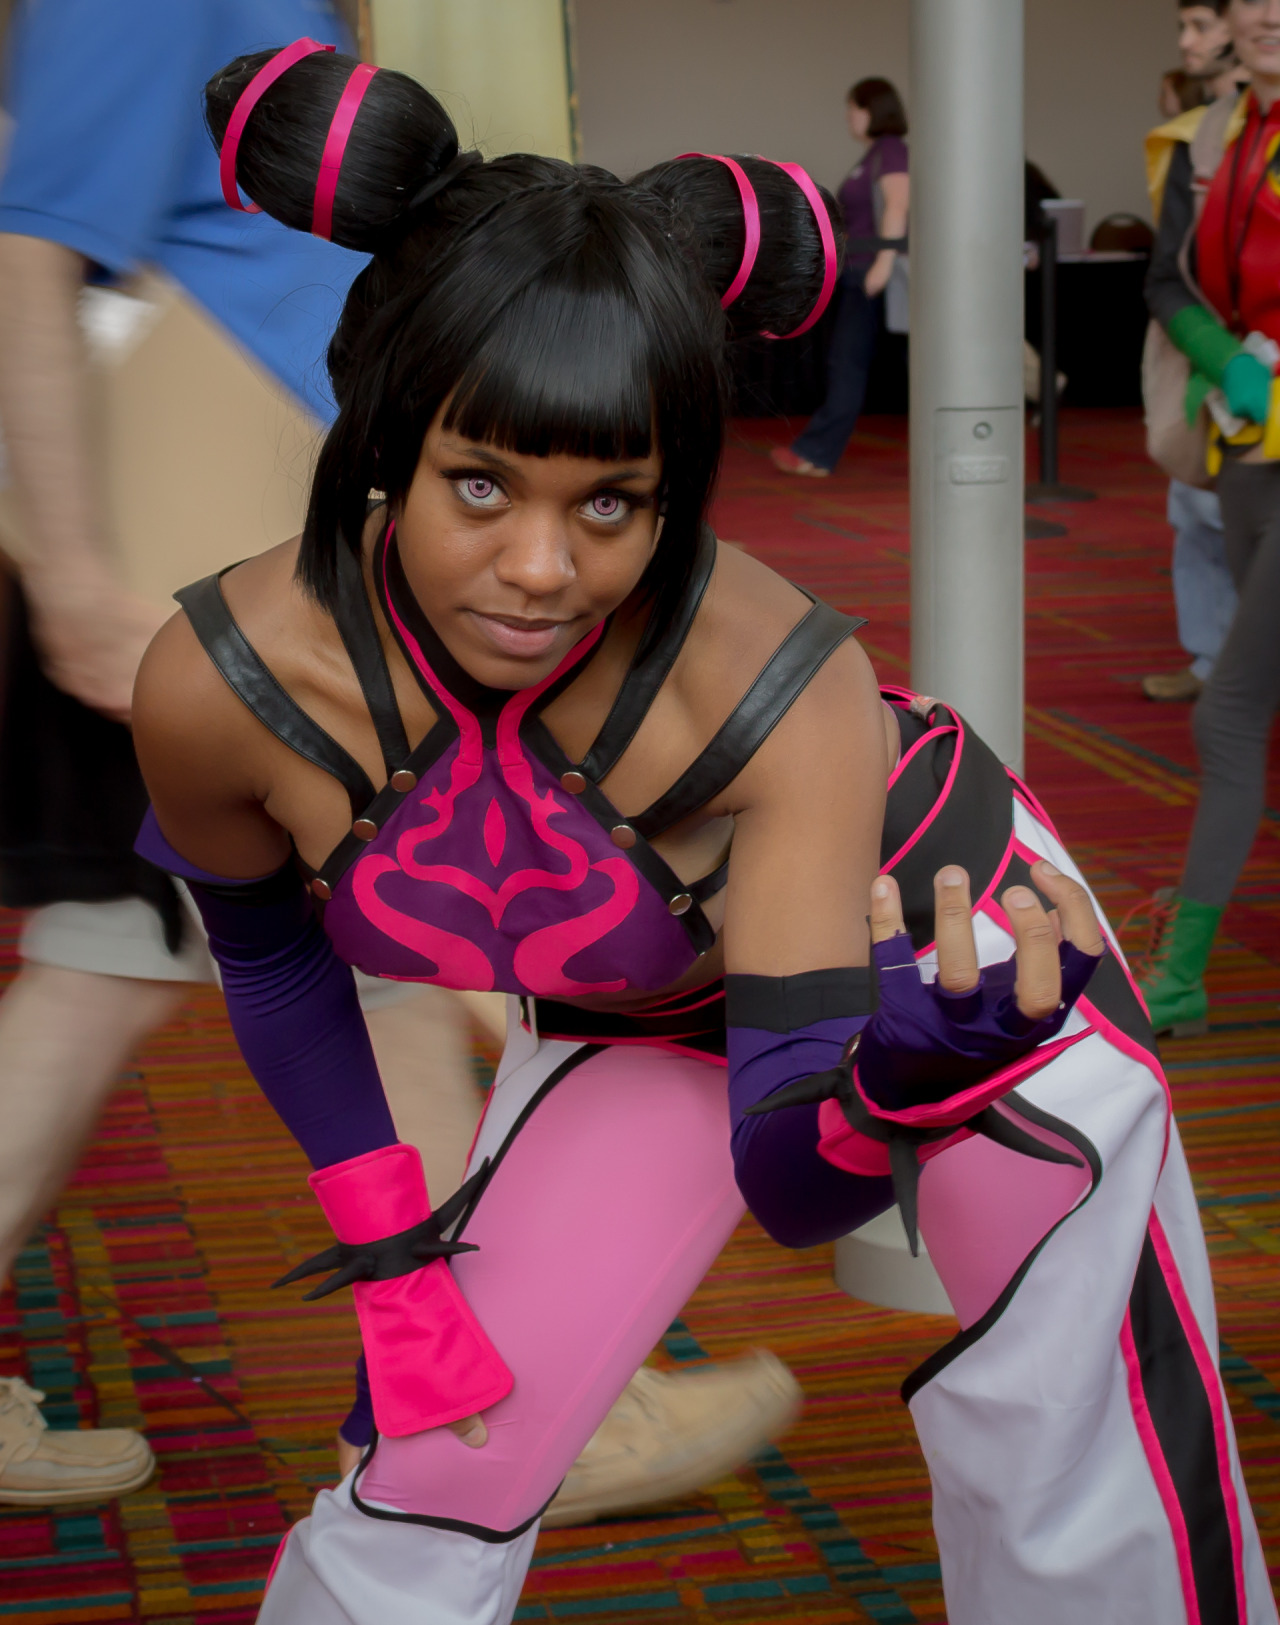 halcyon-siren: Juri Han  Street Fighter  *** Just made a page on fb, if anyone